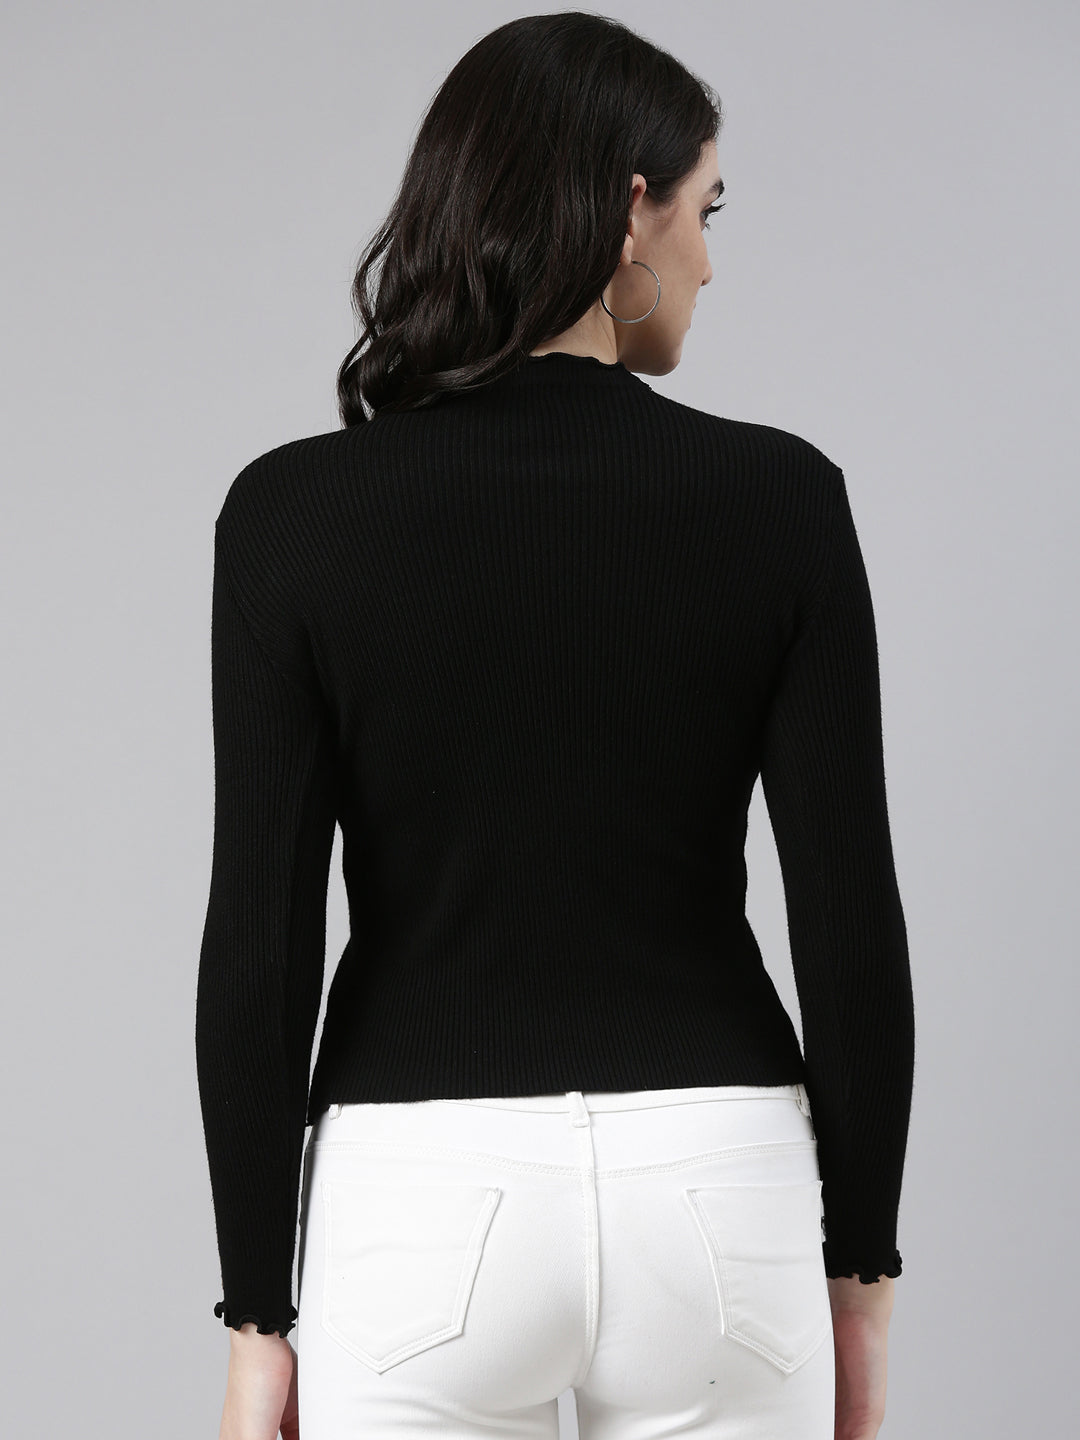 High Neck Solid Regular Sleeves Fitted Black Top